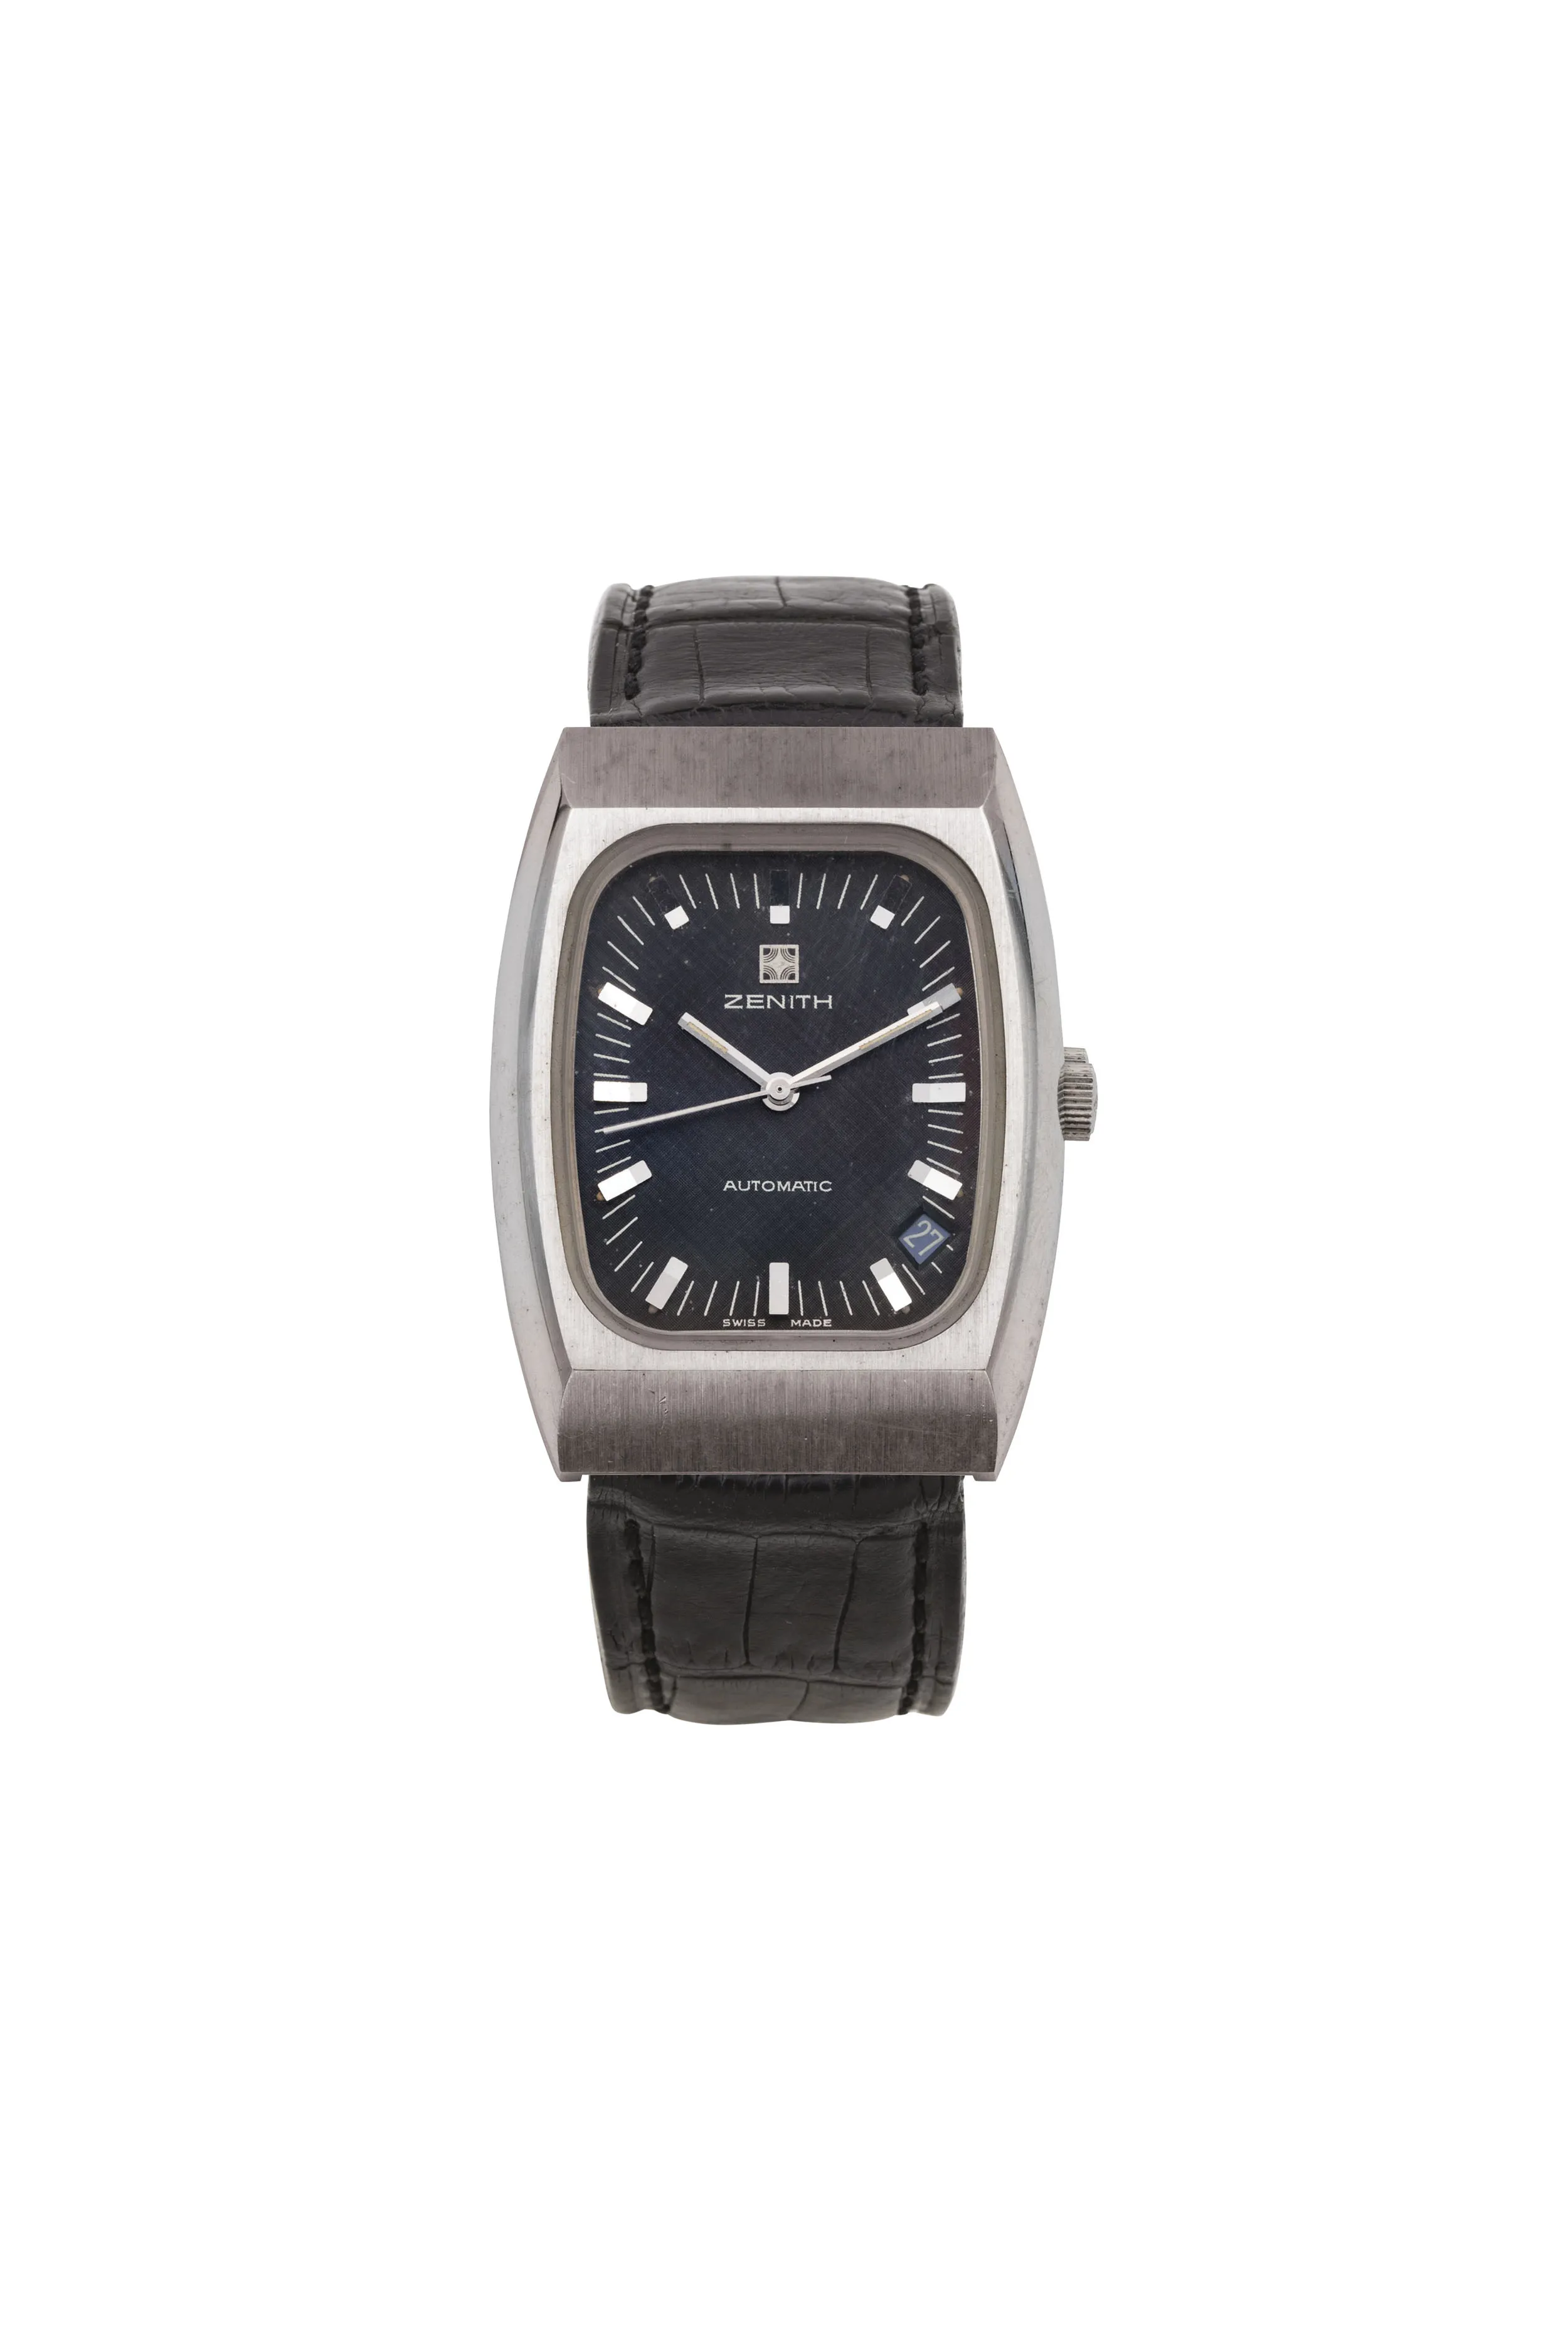 Zenith 01-0030-380 32mm Stainless steel